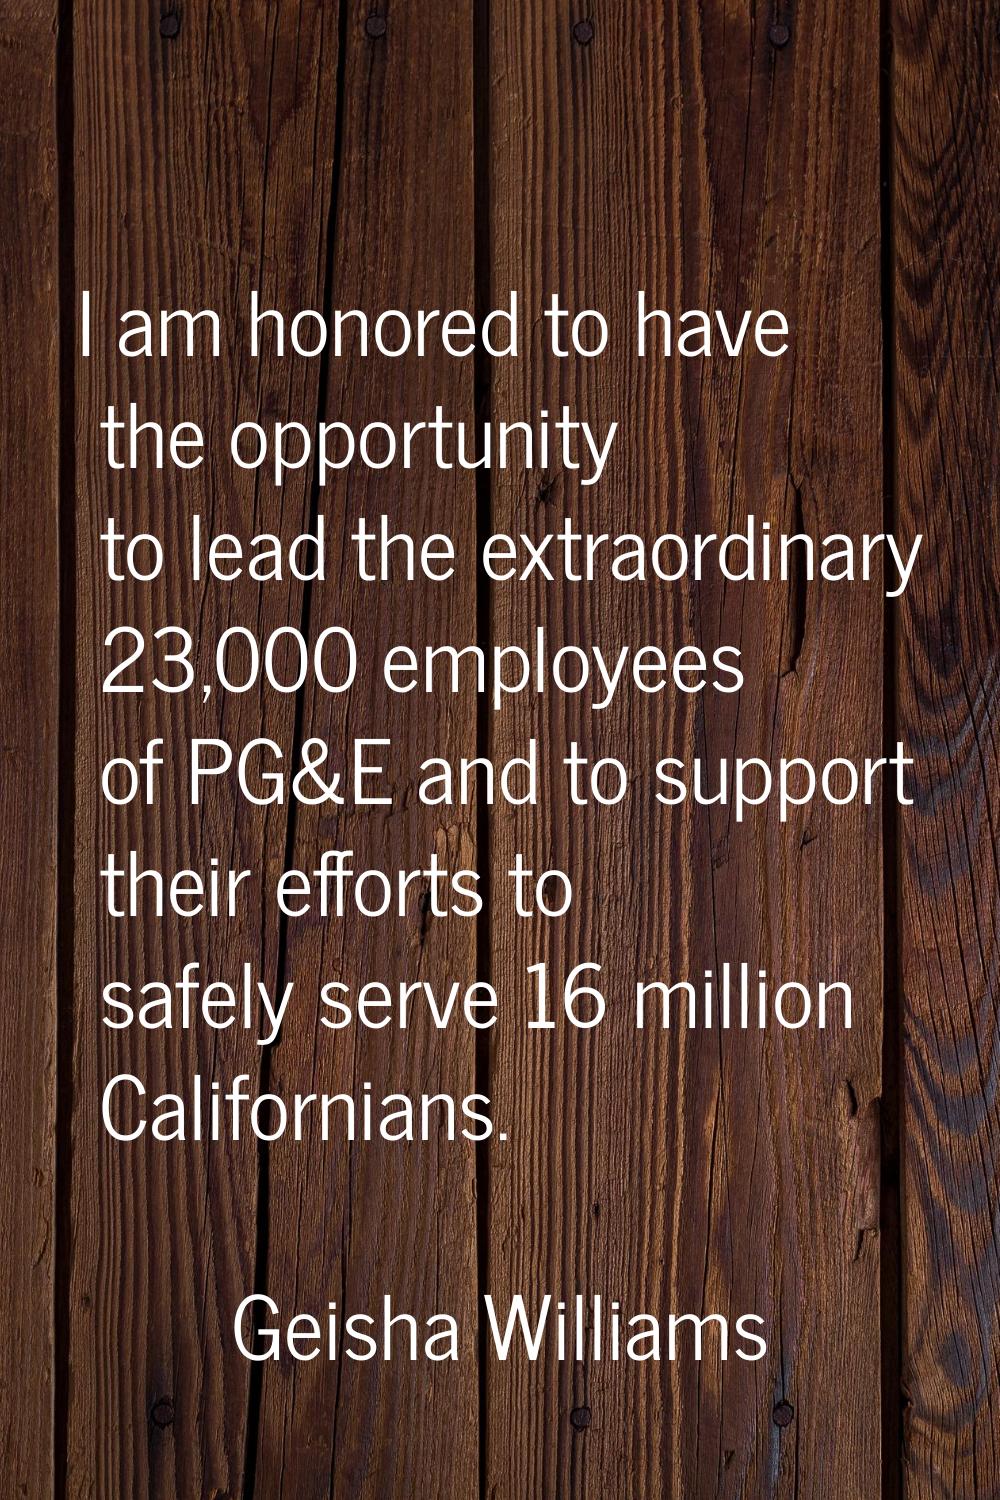 I am honored to have the opportunity to lead the extraordinary 23,000 employees of PG&E and to supp